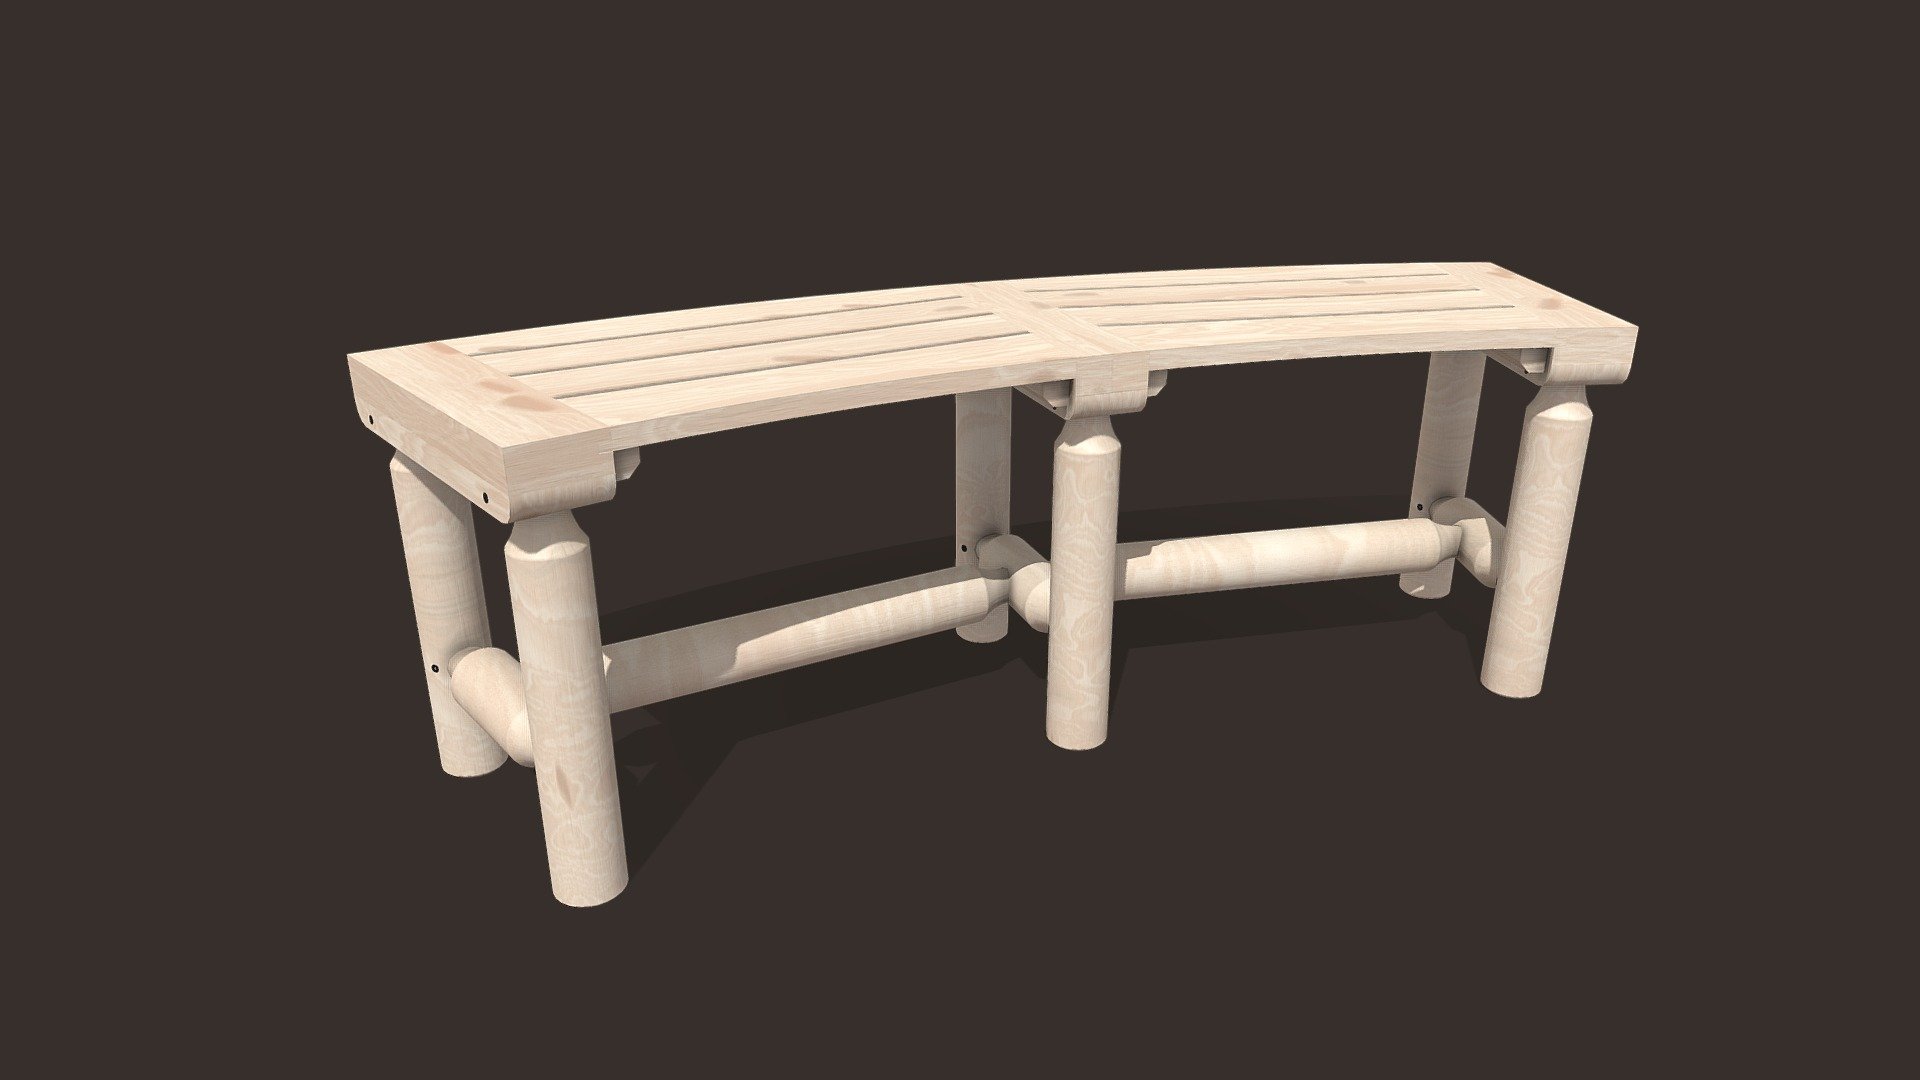 Garden Bench  is a model that will enhance detail and realism to any of your rendering projects. The model has a fully textured, detailed design that allows for close-up renders, and was originally modeled in Blender 3.5, Textured in Substance Painter 2023 and rendered with Adobe Stagier Renders have no post-processing.

Features: -High-quality polygonal model, correctly scaled for an accurate representation of the original object. -The model’s resolutions are optimized for polygon efficiency. -The model is fully textured with all materials applied. -All textures and materials are included and mapped in every format. -No cleaning up necessary just drop your models into the scene and start rendering. -No special plugin needed to open scene.

Measurements: Units: M

File Formats: OBJ FBX

Textures Formats: PNG 4k - Garden Bench - Buy Royalty Free 3D model by MDgraphicLAB 3d model